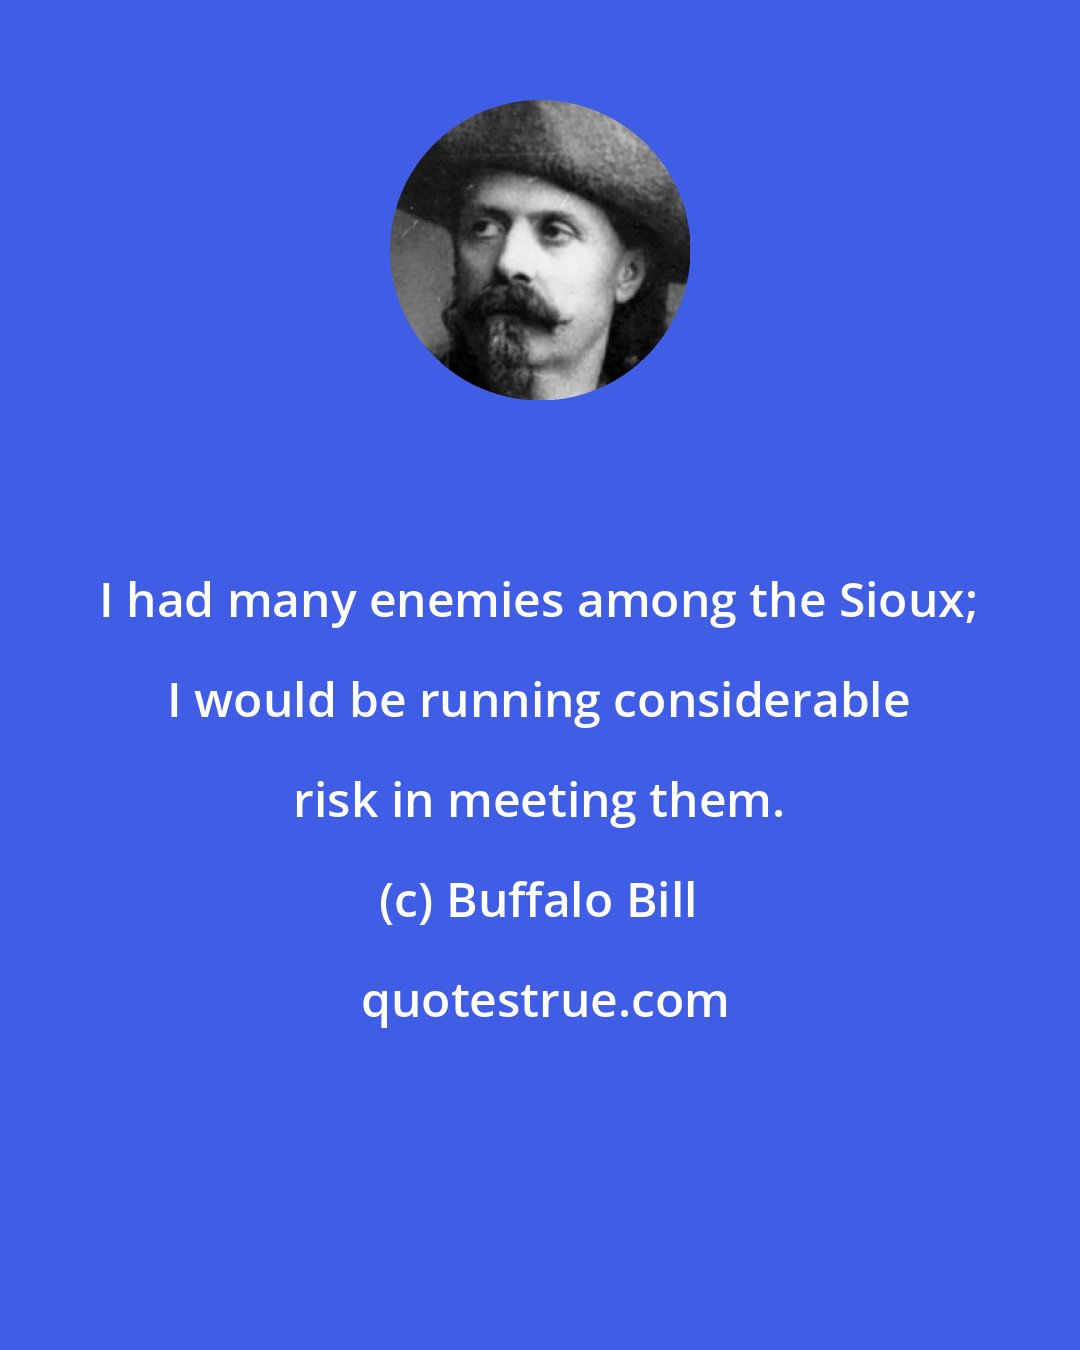 Buffalo Bill: I had many enemies among the Sioux; I would be running considerable risk in meeting them.